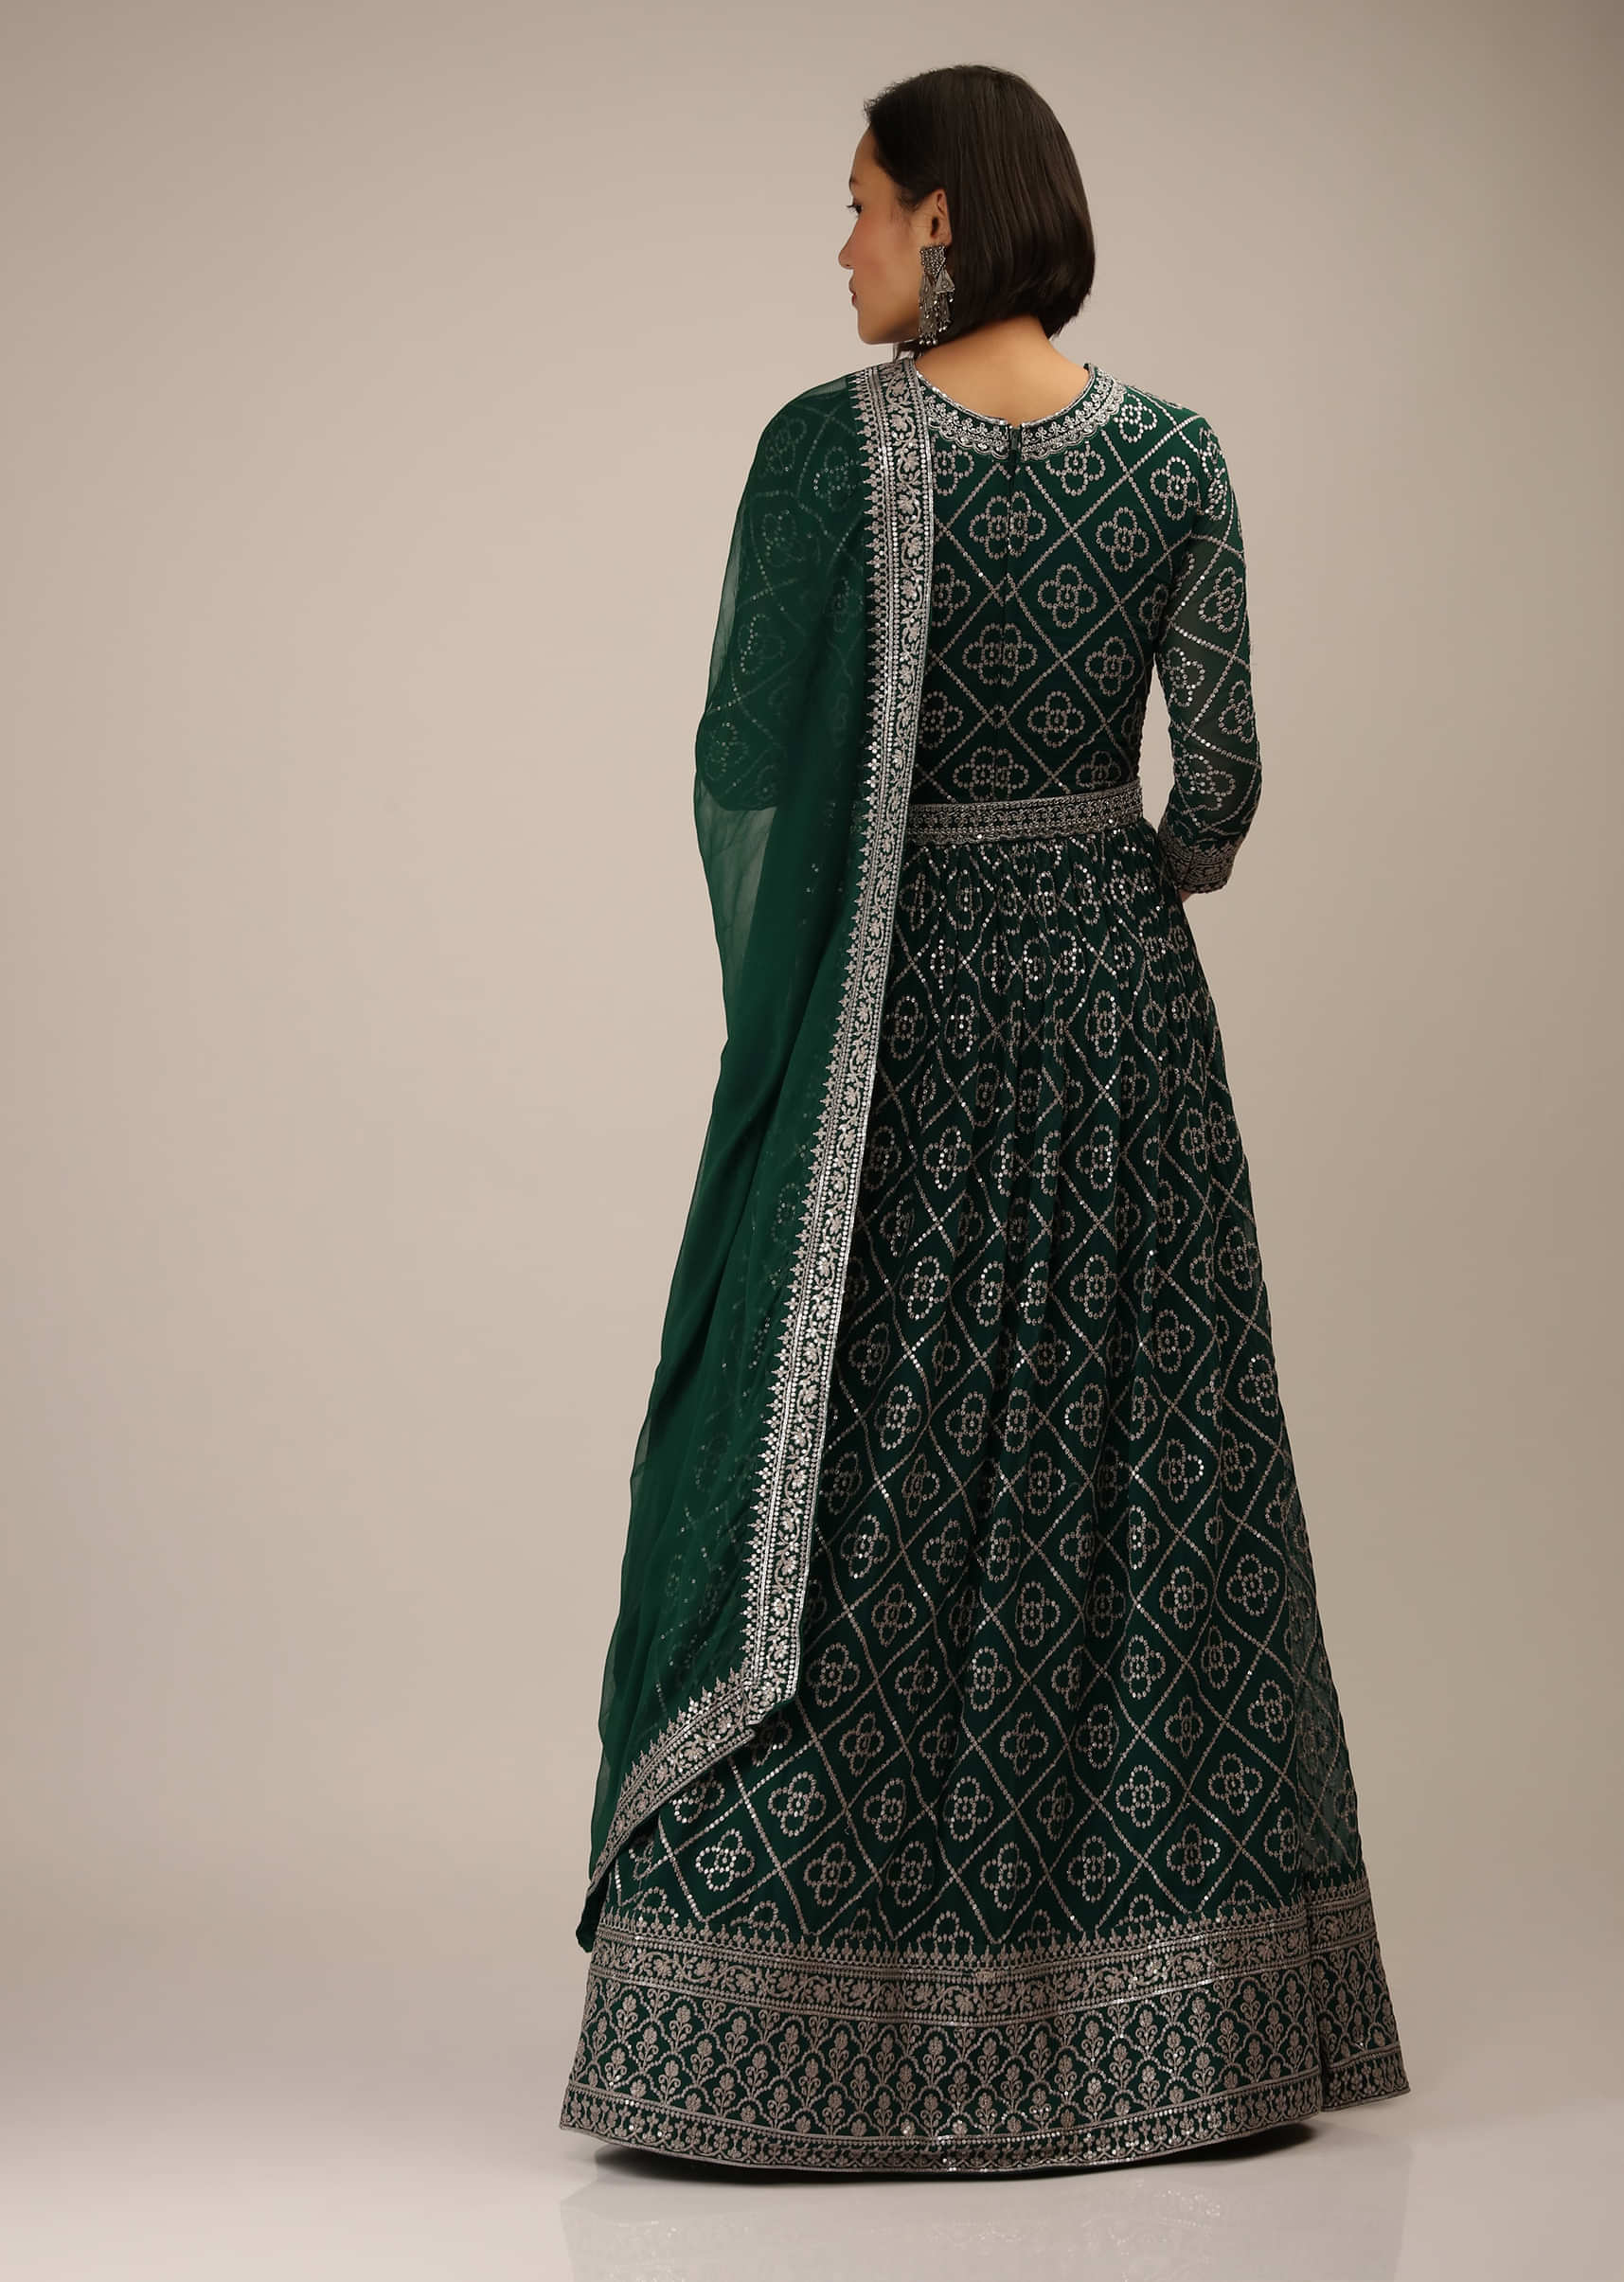 Emerald Green Anarkali Suit In Georgette With Zari And Sequins Embroidered Jaal And Three Quarter Sleeves